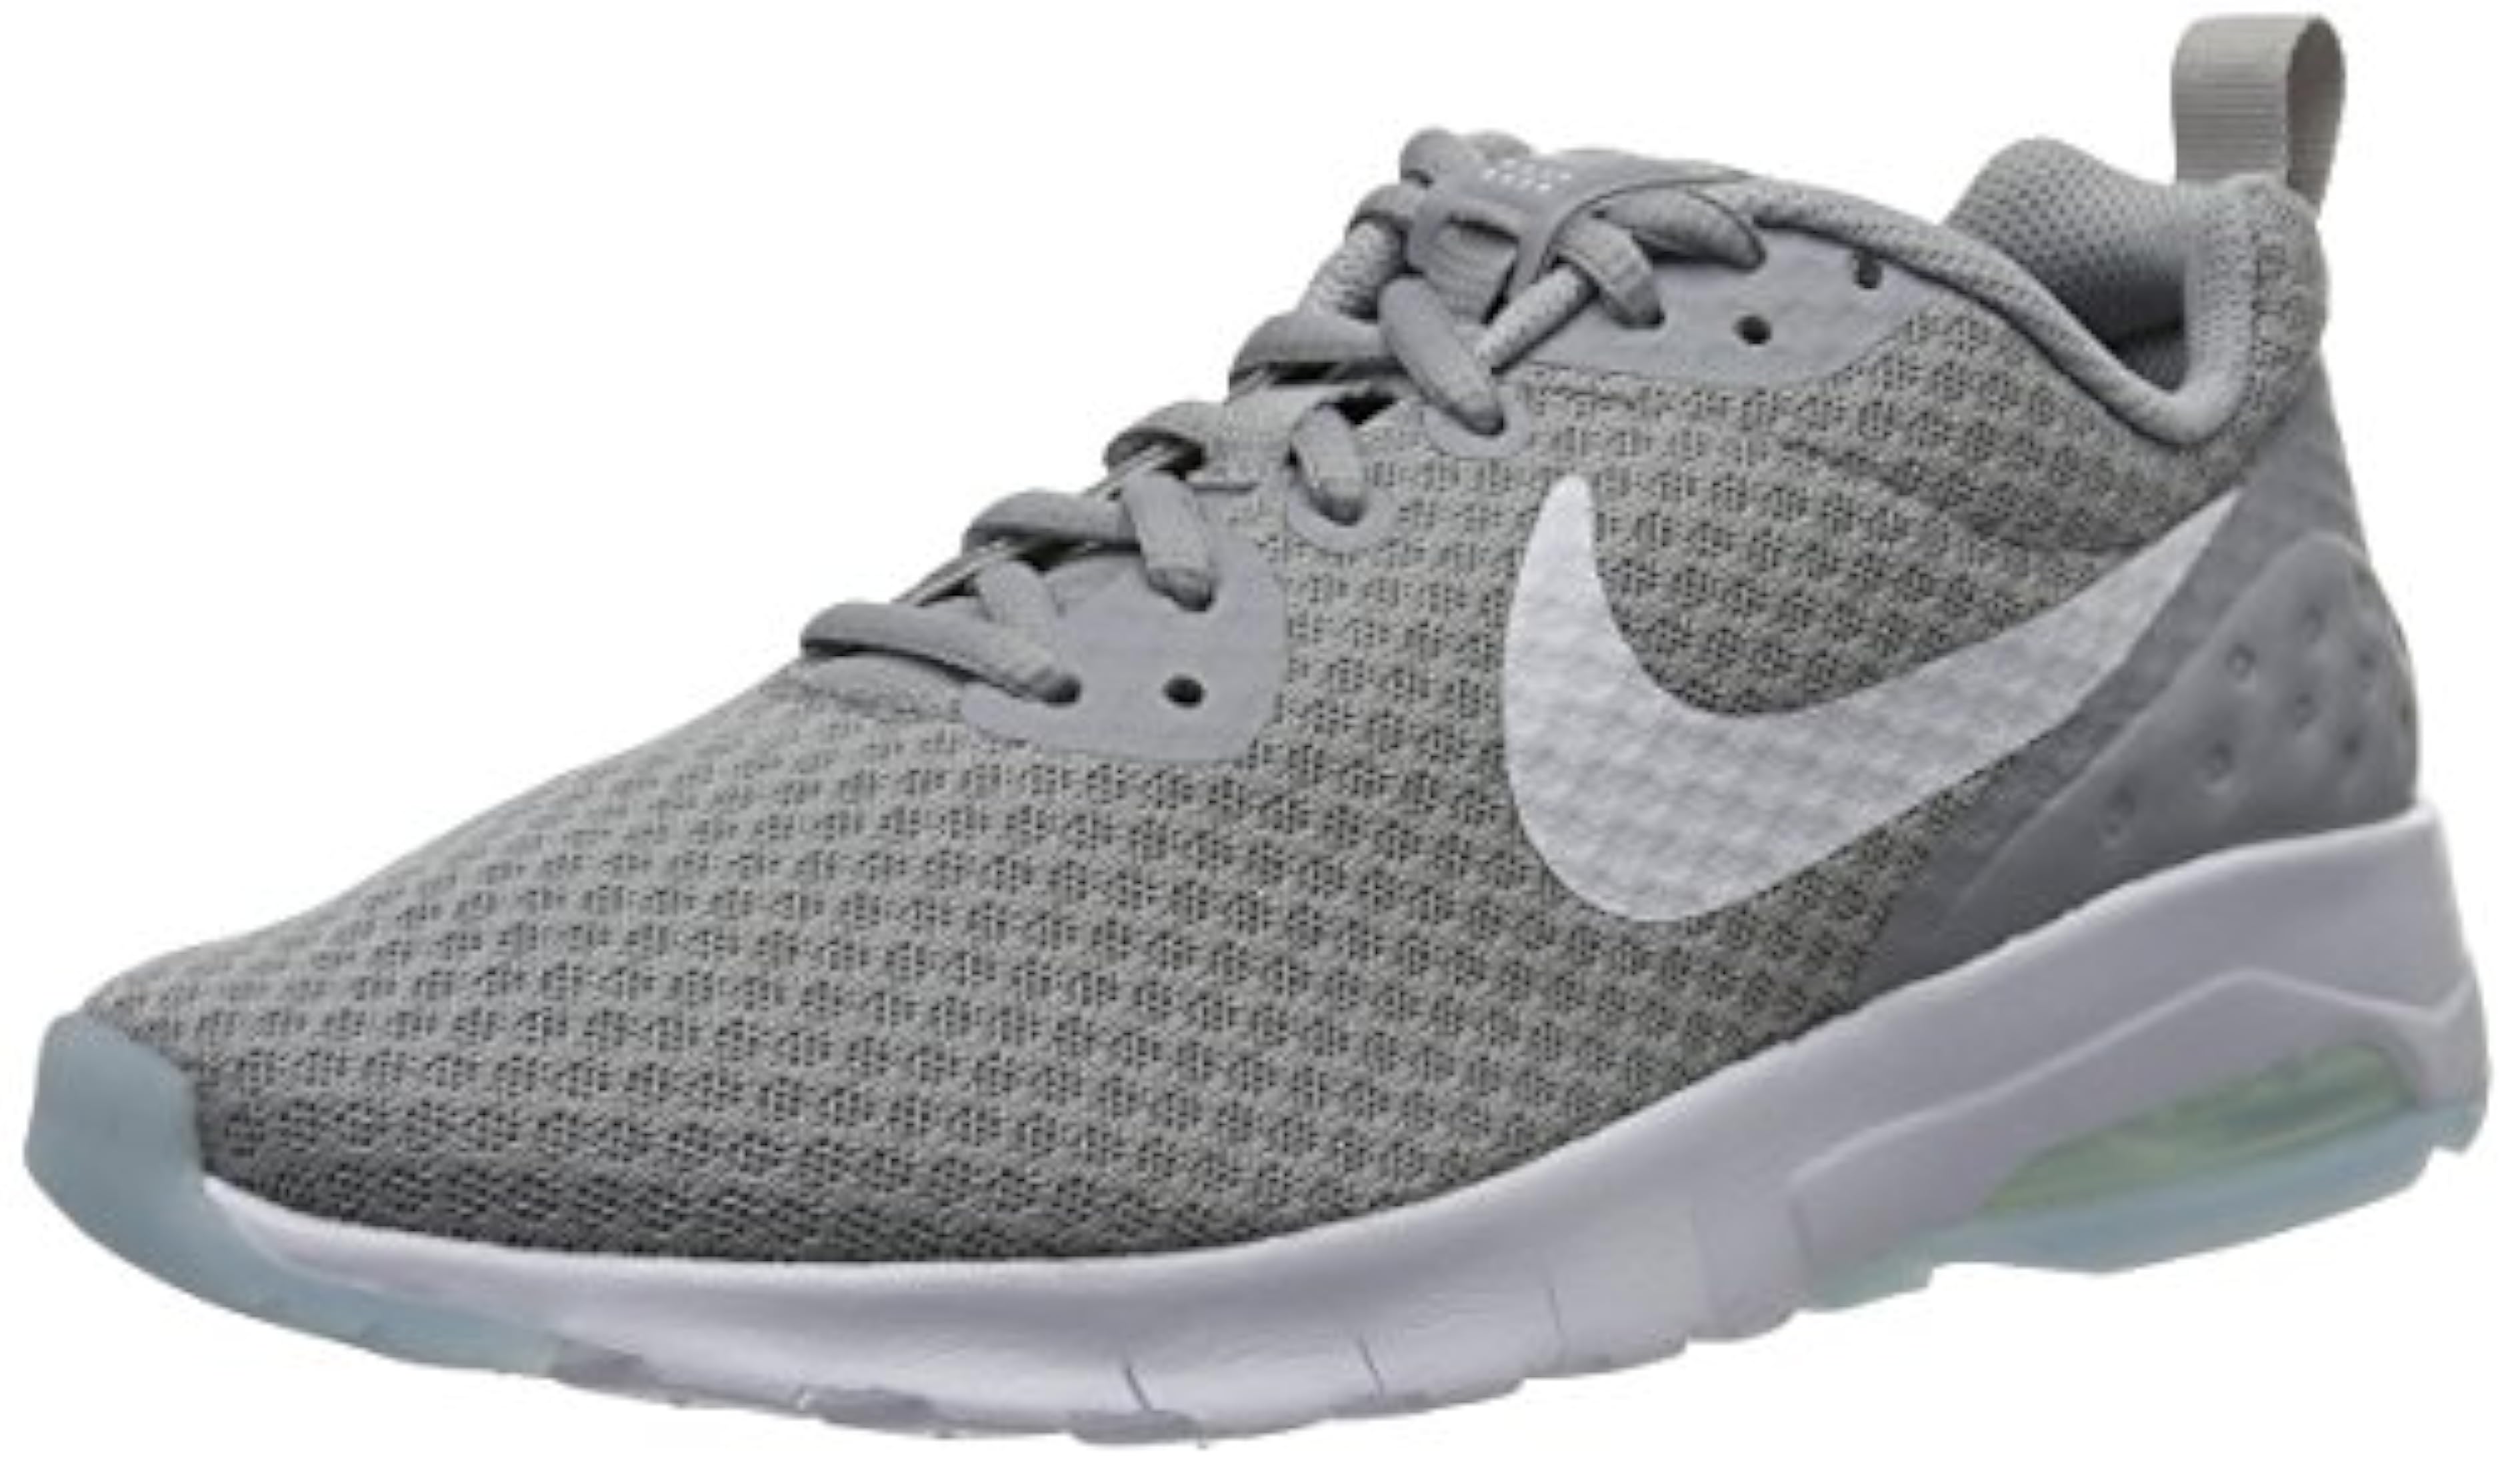 NIKE Men's Air Max Motion Low Cross Trainer, Wolf Grey/White